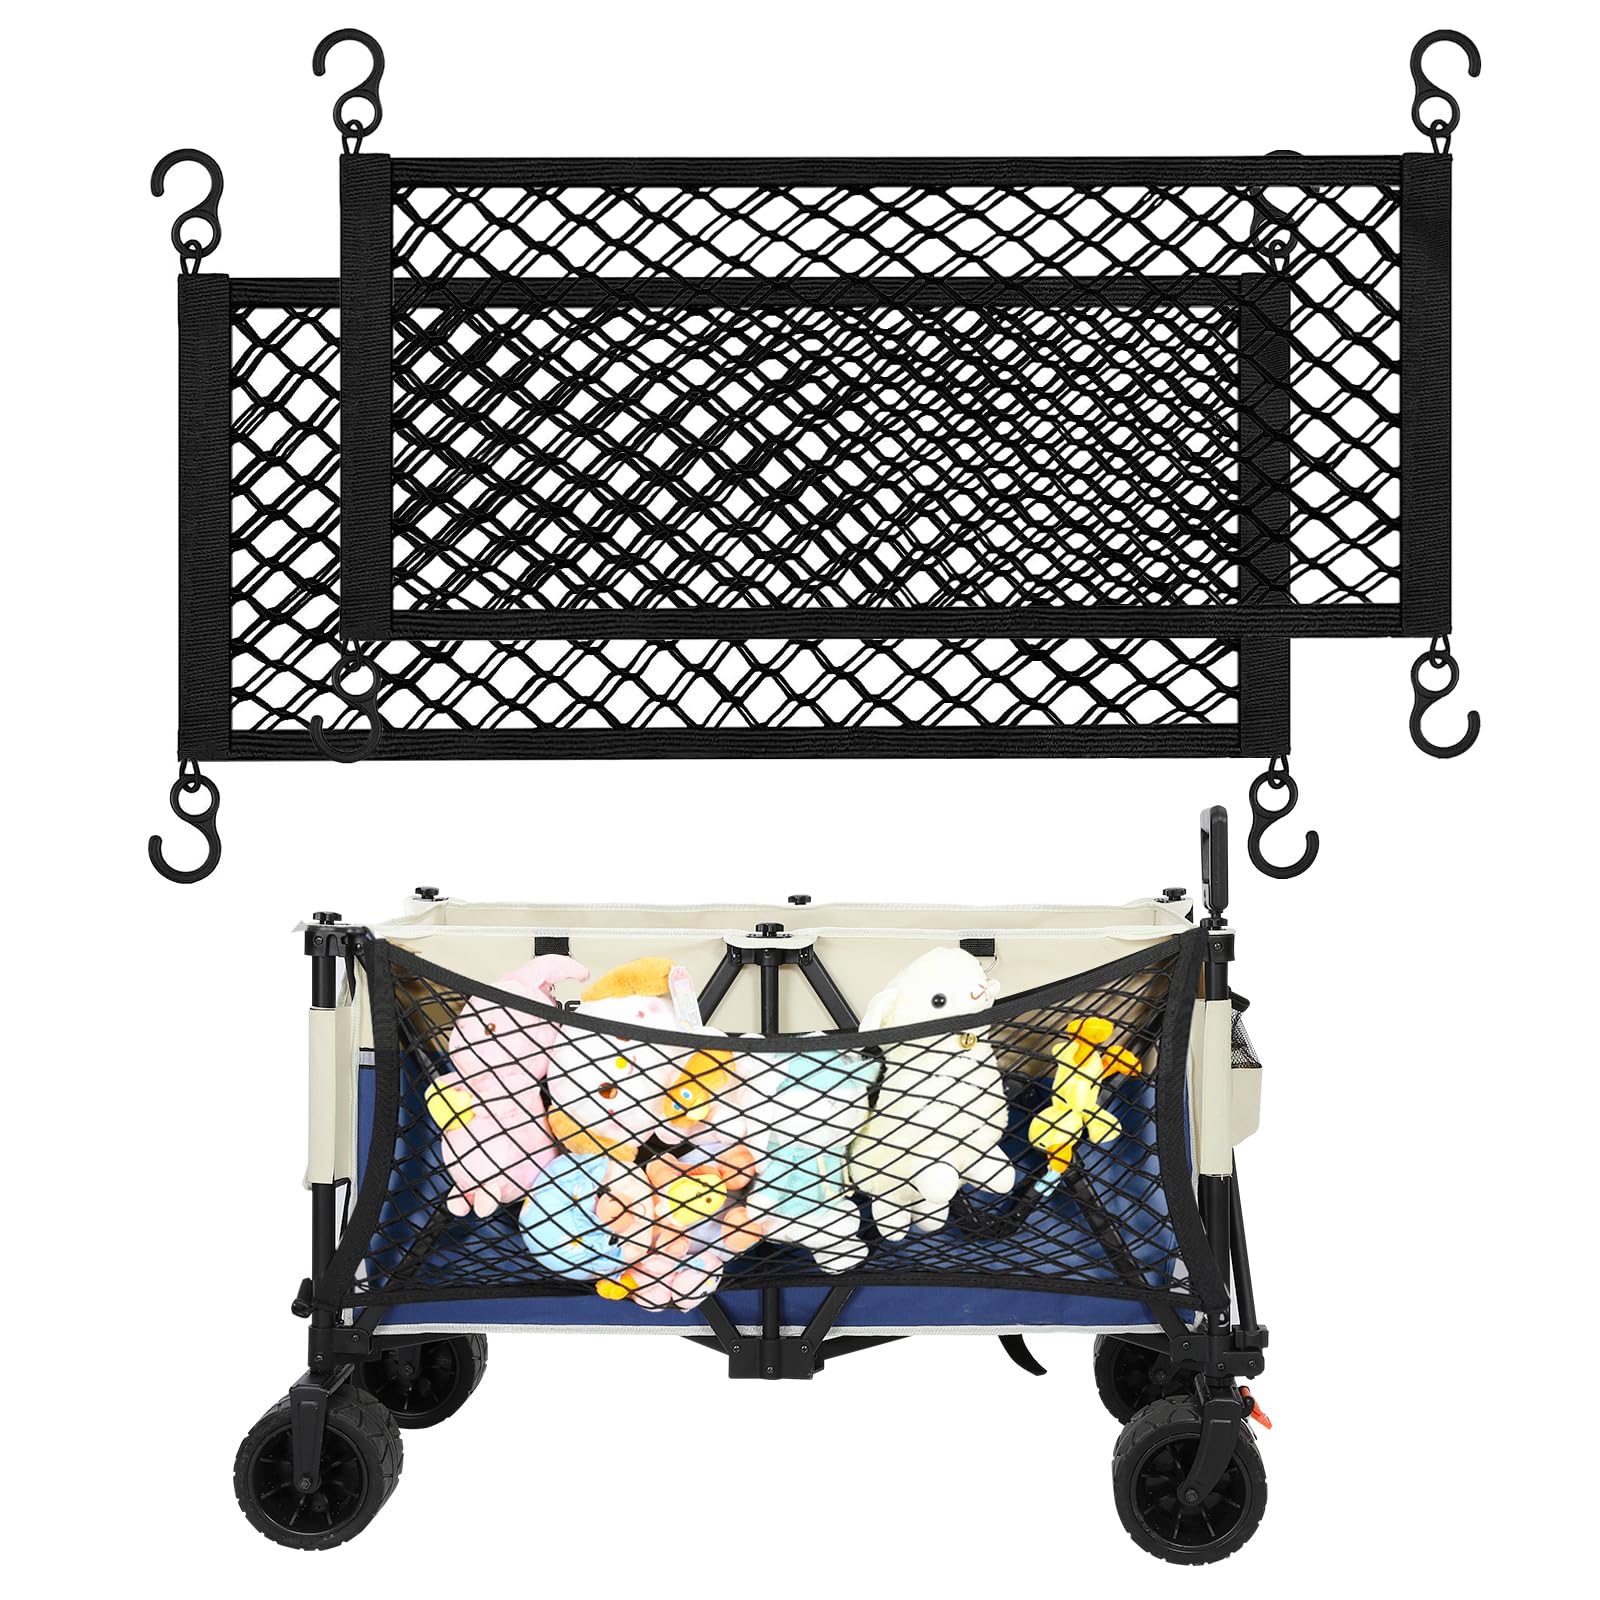 Raynesys Heavy Duty Wagon Cargo Net, Double-Layer Wagon Accessories for Beach Wagons Carts, Elastic Storage Organizer Net with Hook, 31.5in x 14.5in, 2 Pack